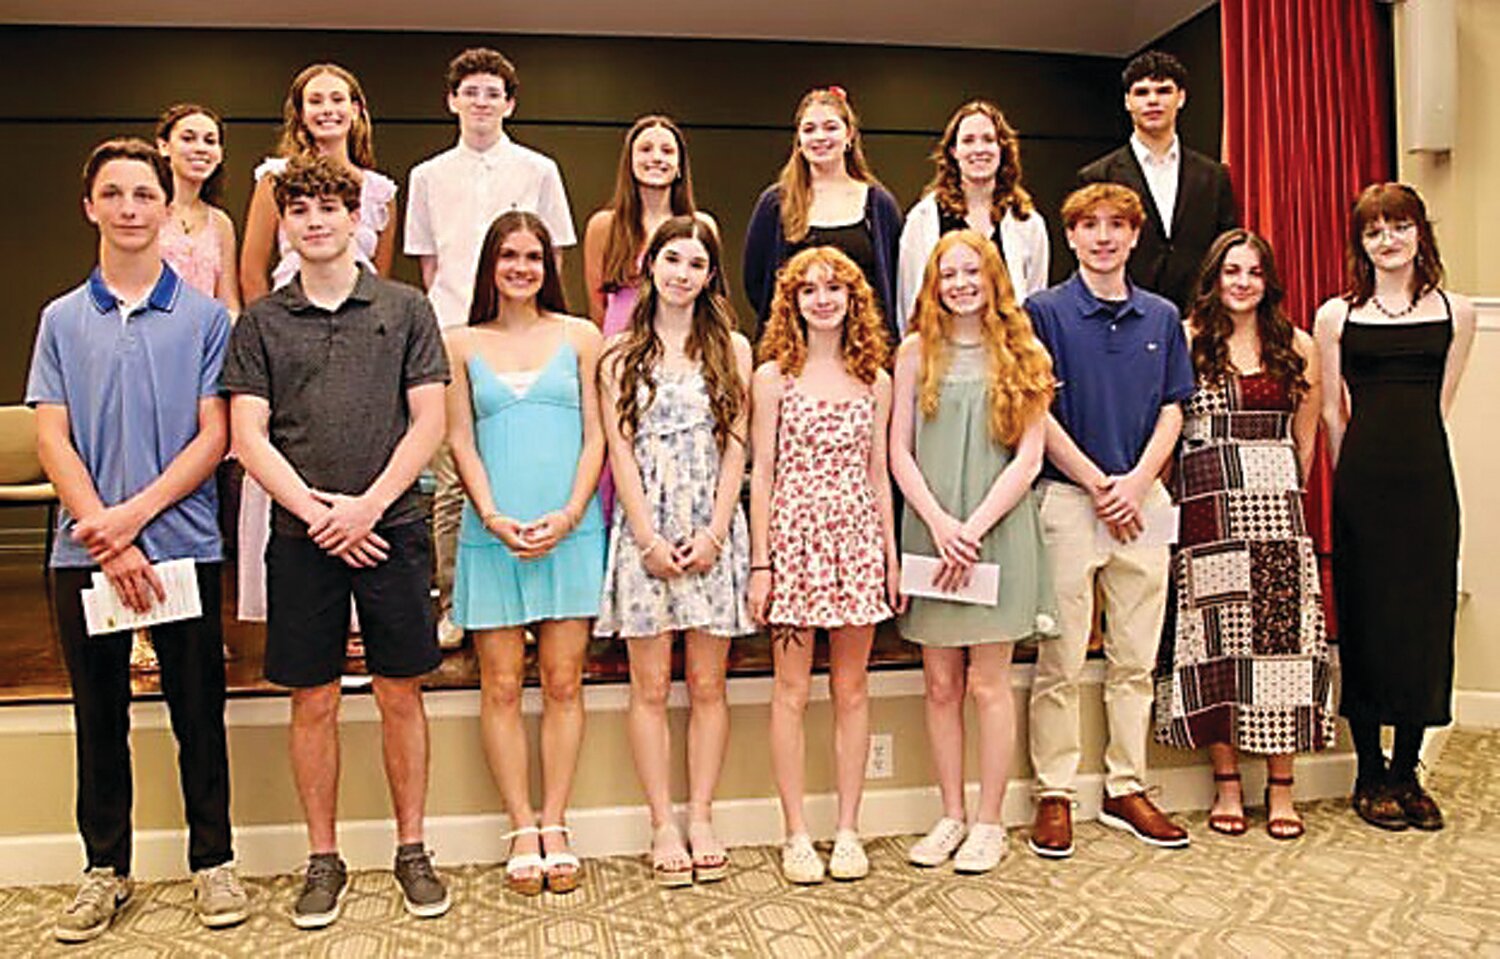 Nineteen graduating high school seniors working in the Pine Run Retirement Community’s dining department were recently awarded scholarships funded by residents at Pine Run Village, the Health Center and Lakeview.